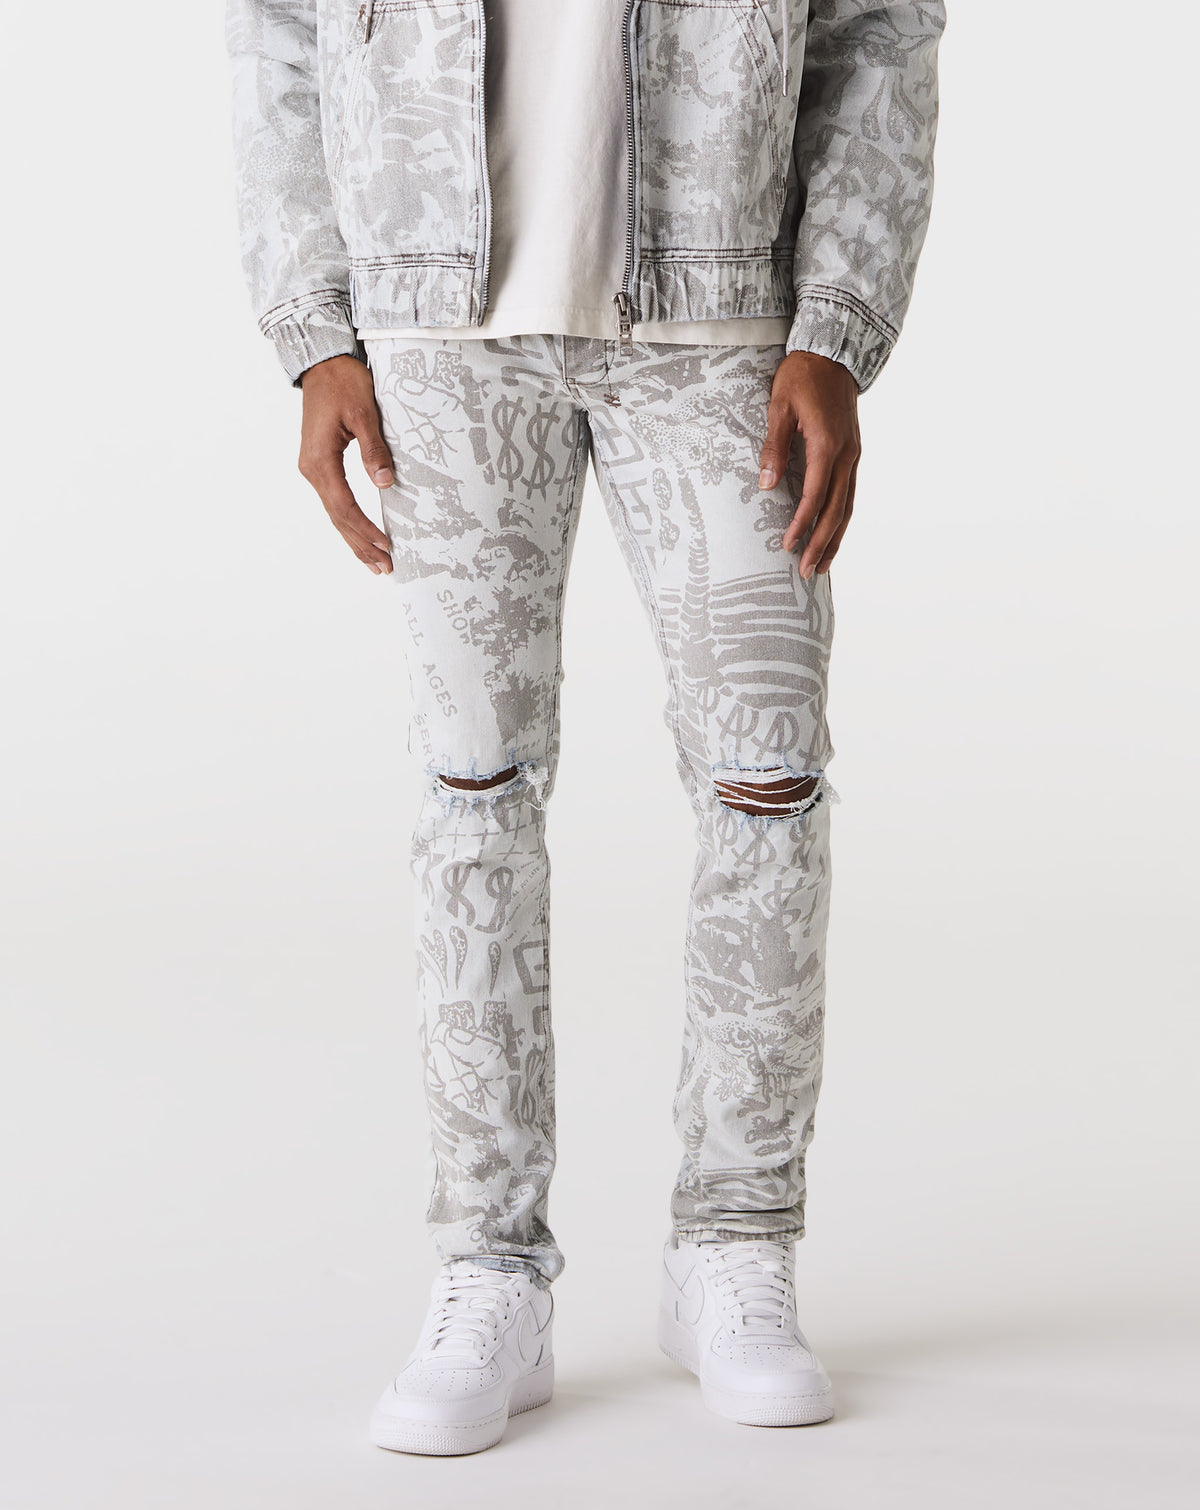 Ksubi Chitch 'Icey' - Rule of Next Apparel